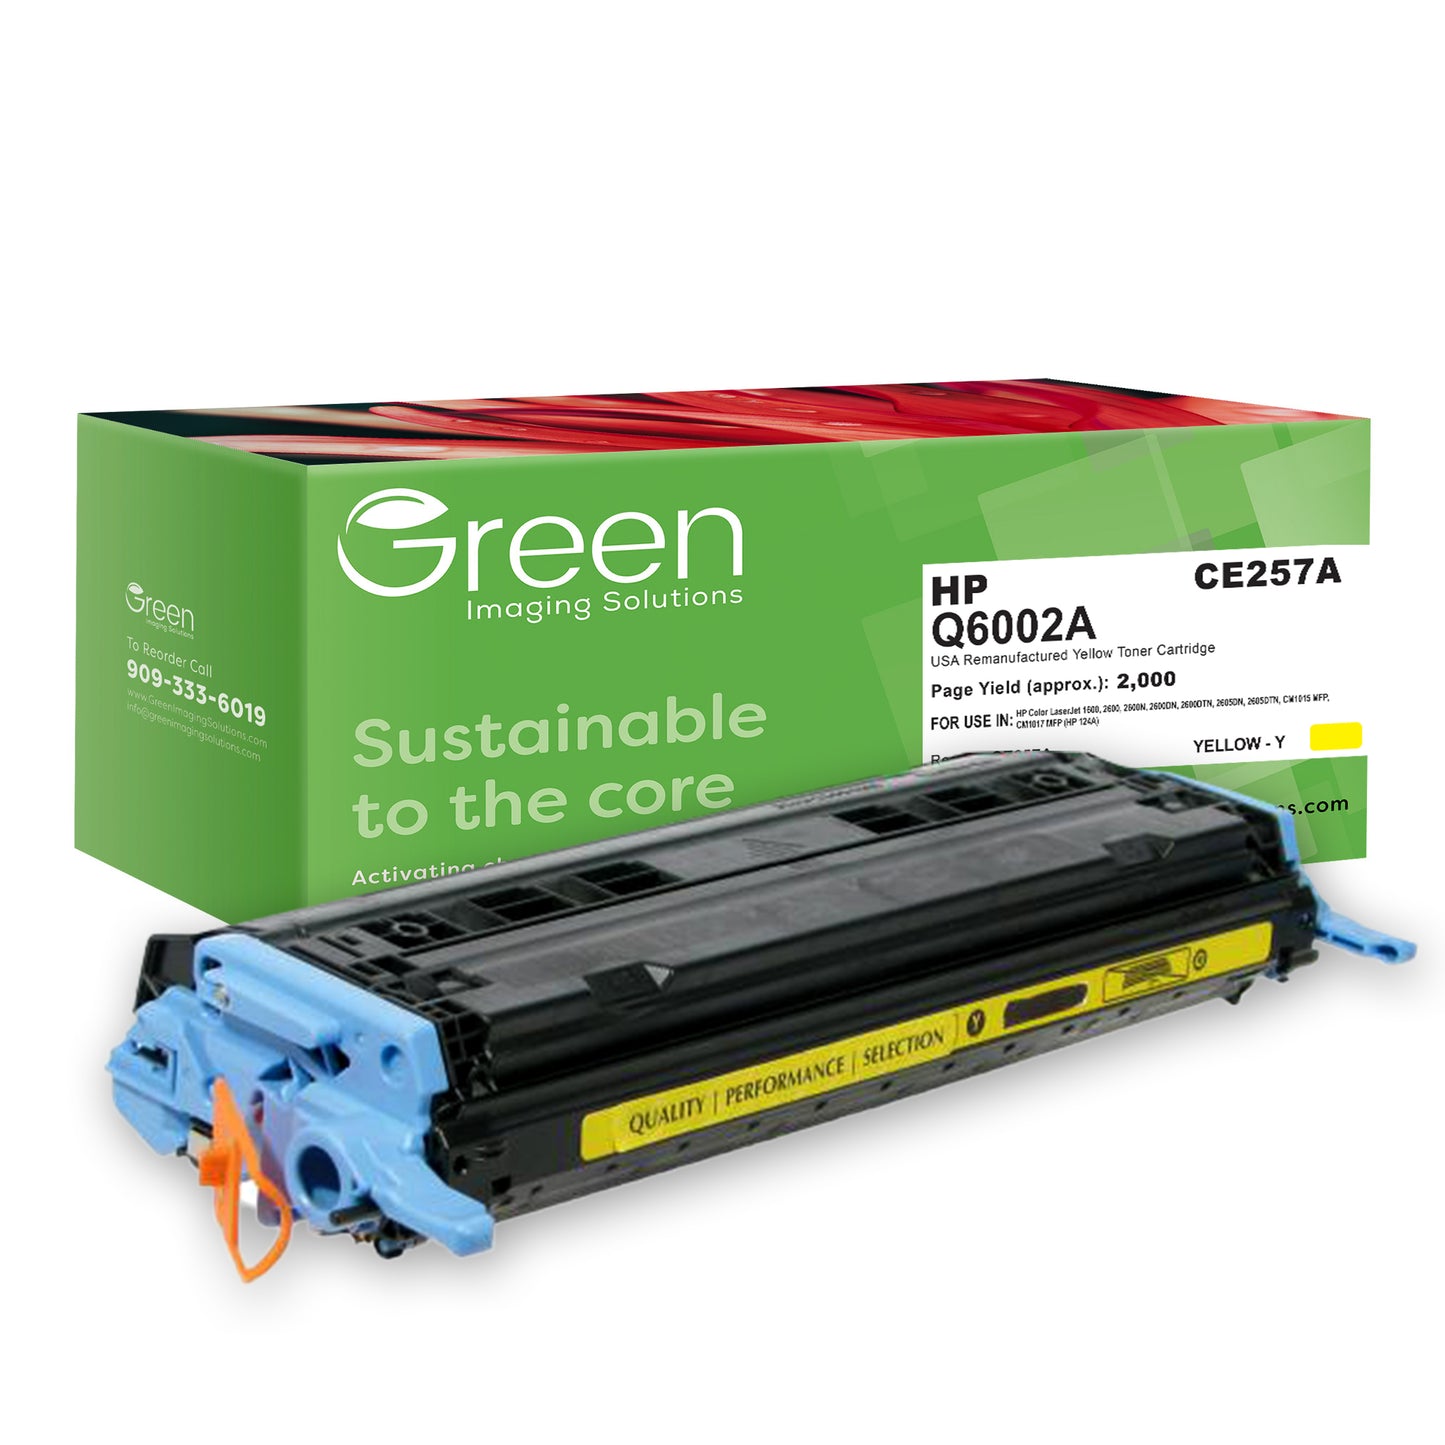 GIS USA Remanufactured Yellow Toner Cartridge for HP Q6002A (HP 124A)